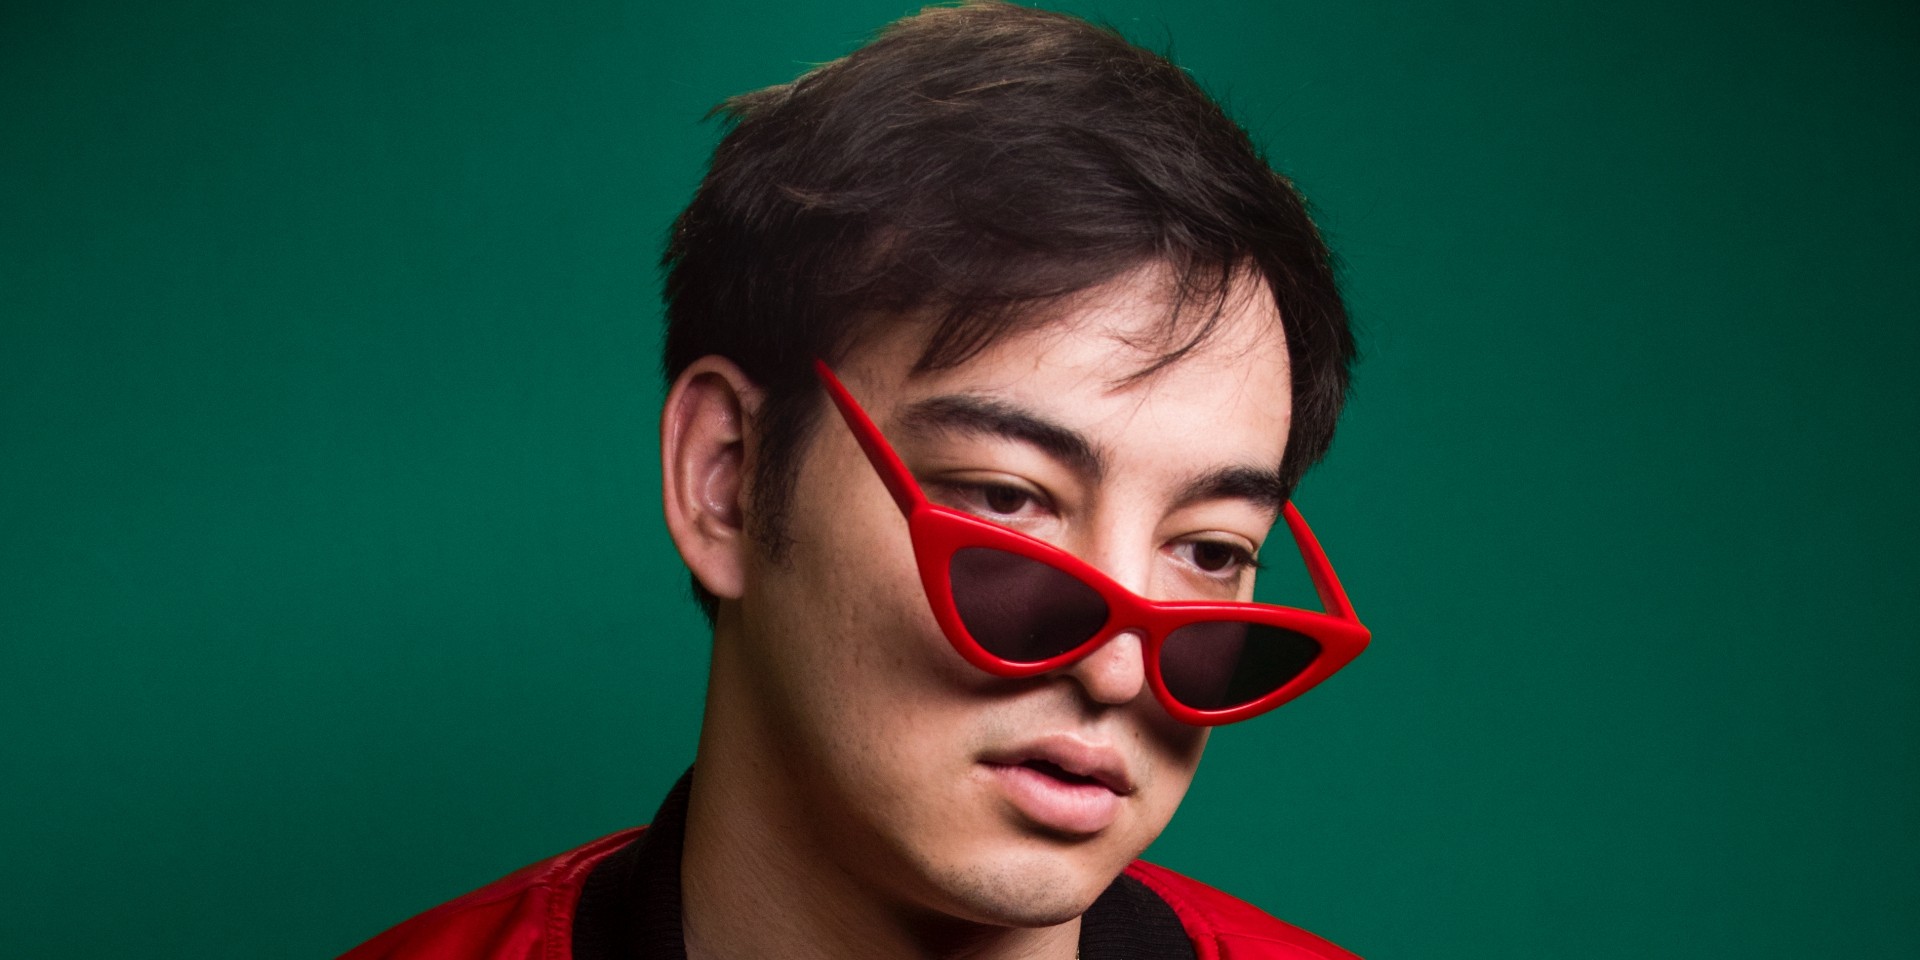 "I got a box cutter with your name on it": An interview with Joji